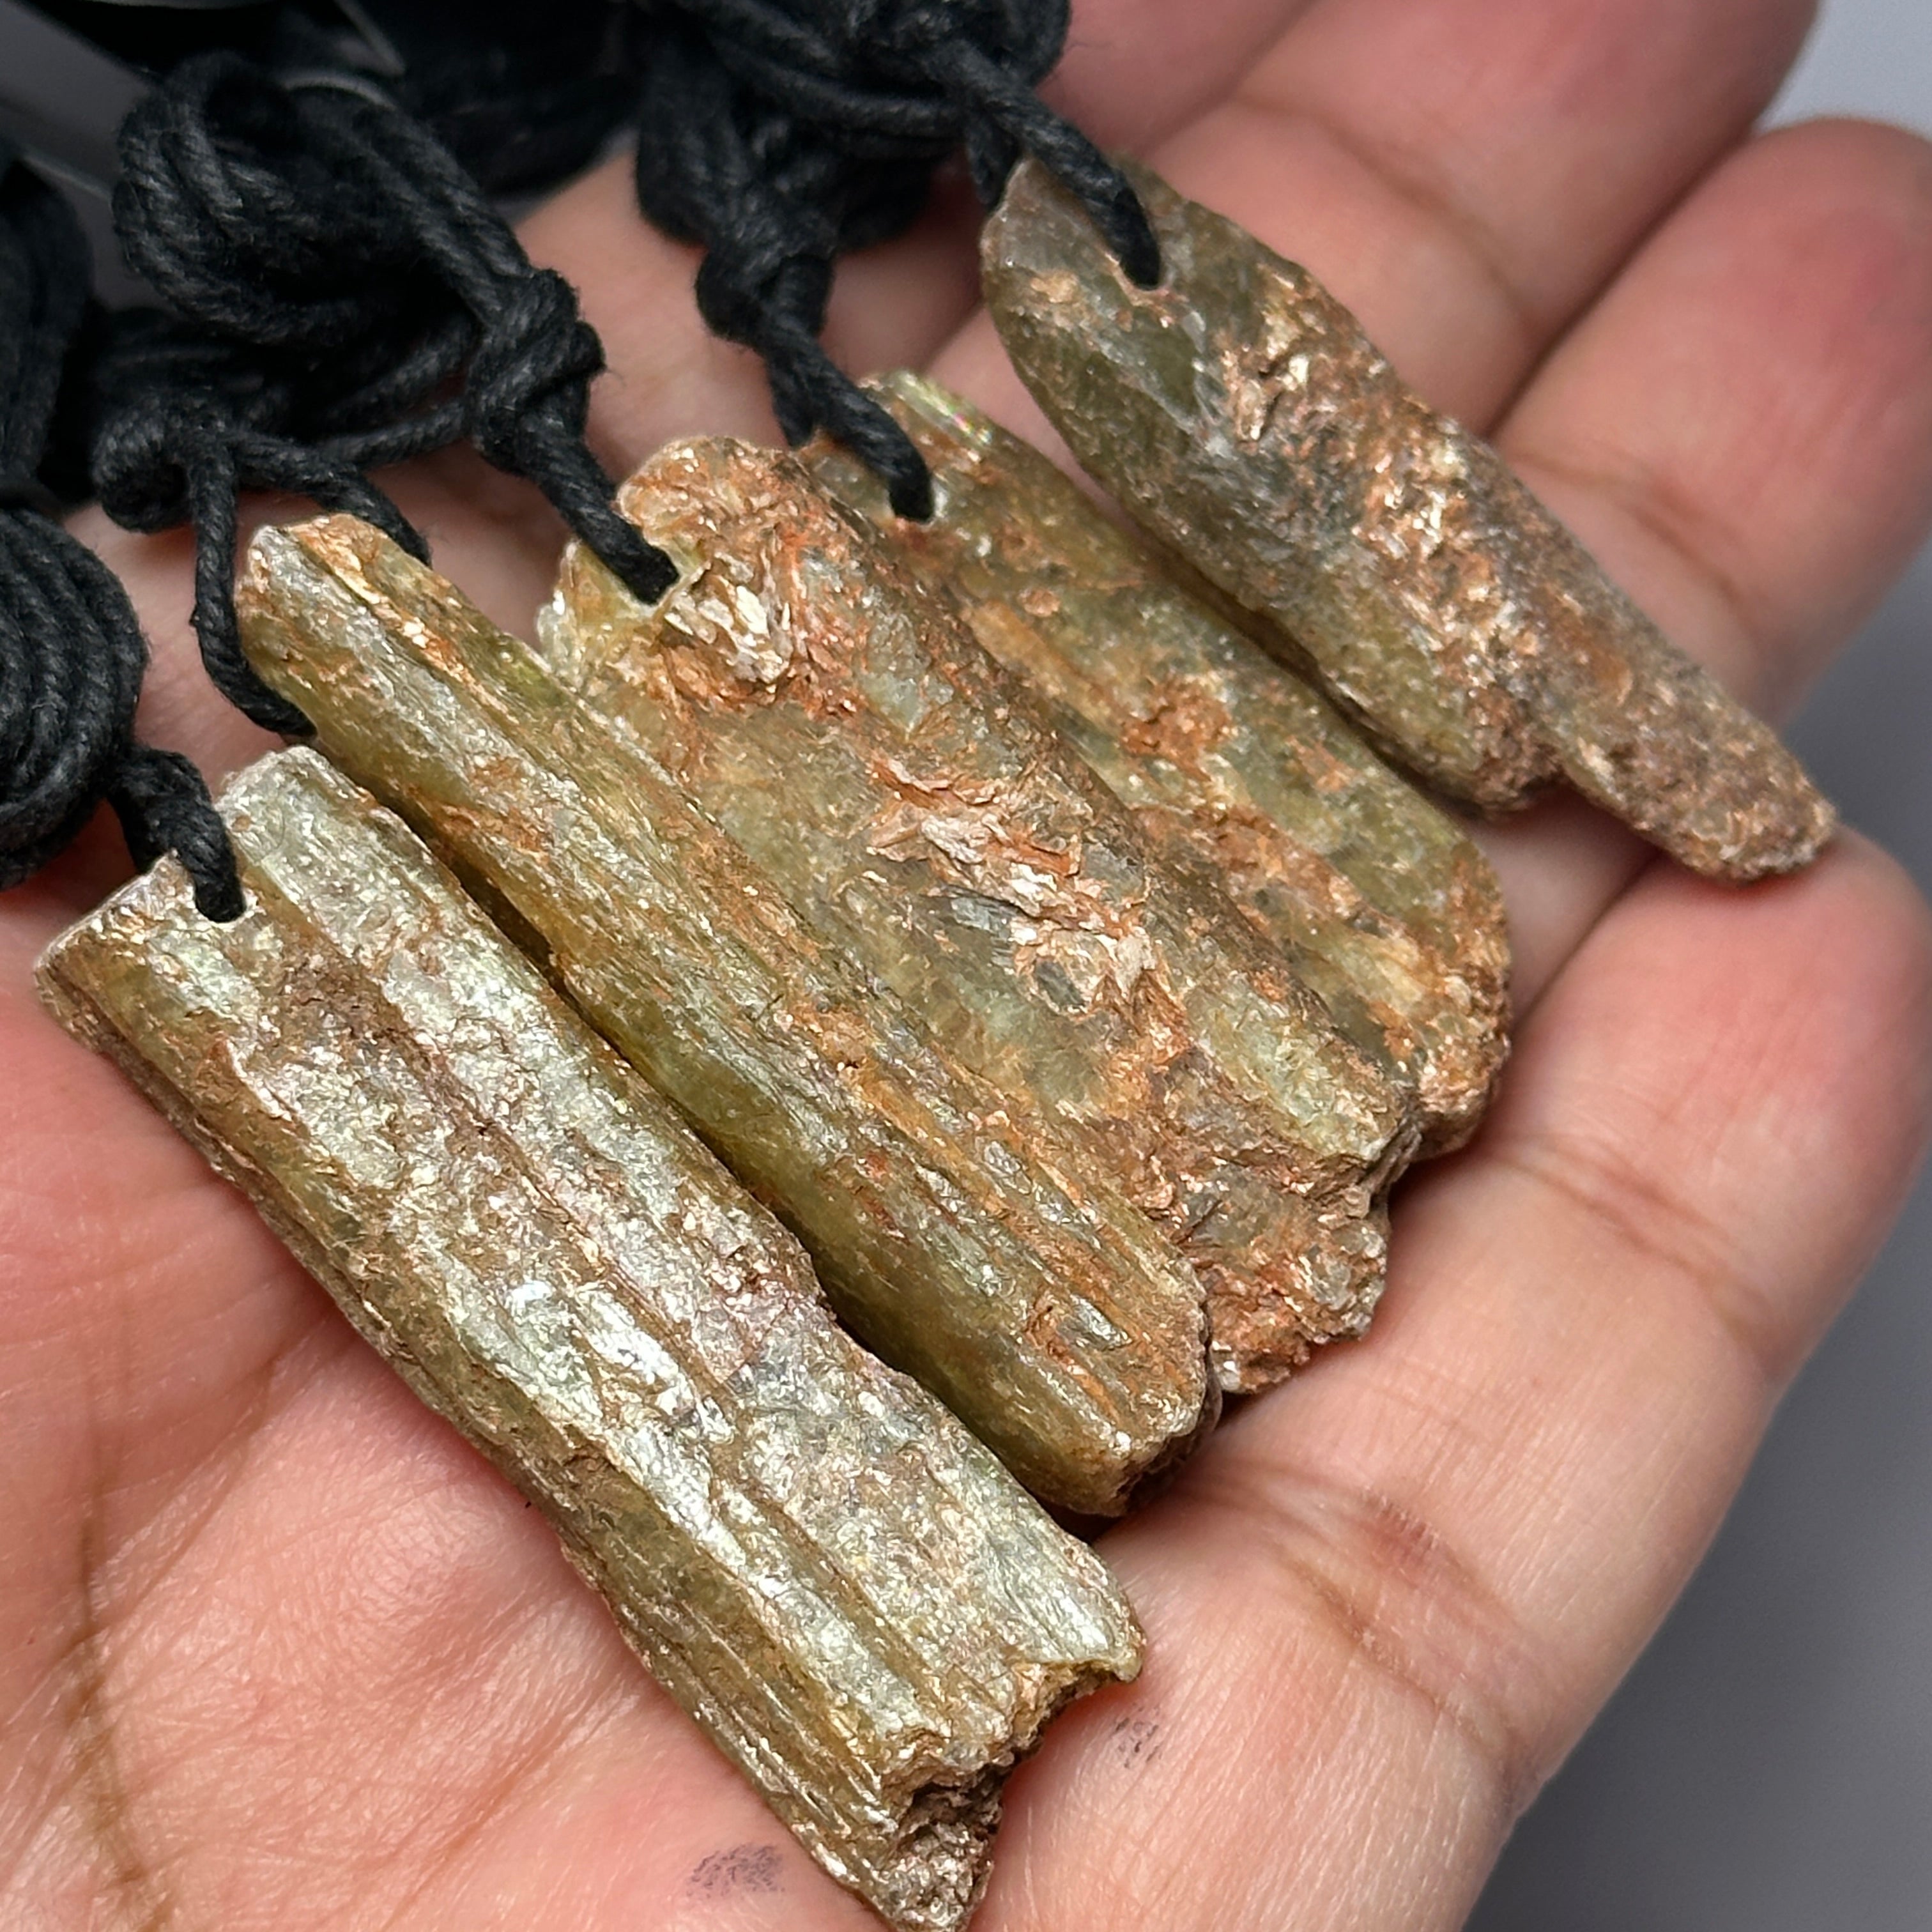 5 pcs Tanzanian Kyanite with Mica Crystal pendants lot. Price is for all 5